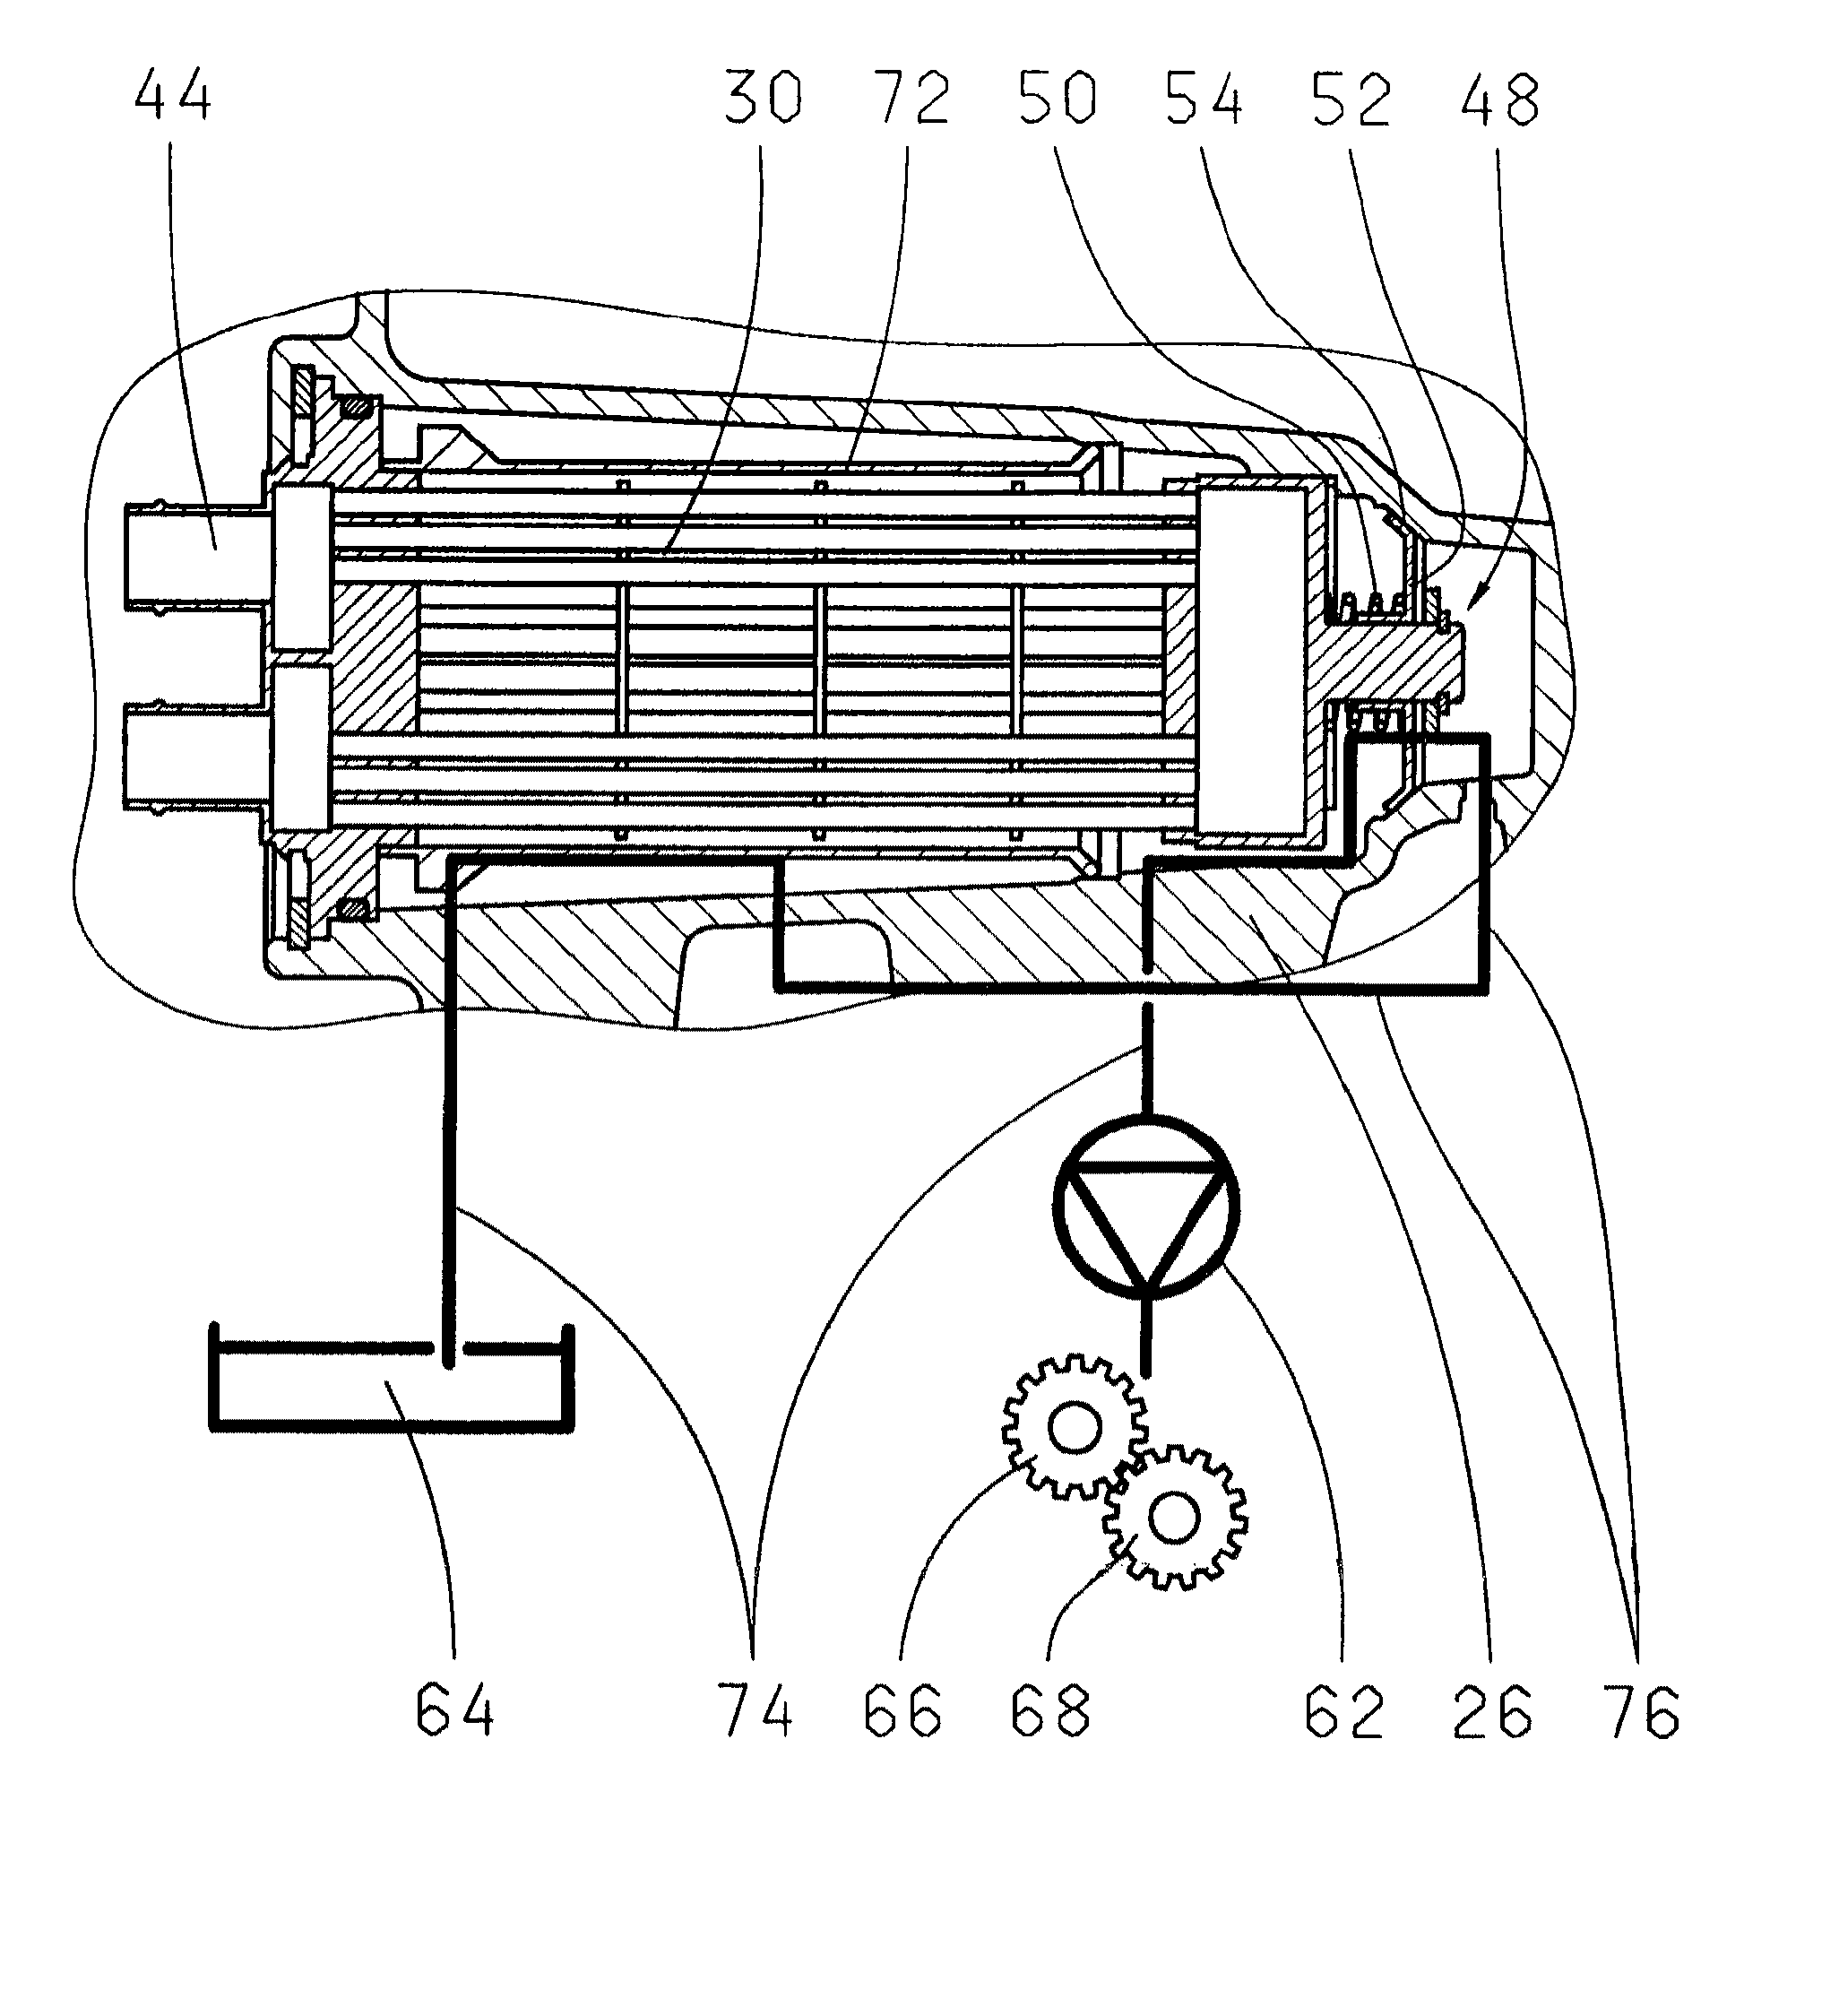 Heat exchanger with integrated bypass valve